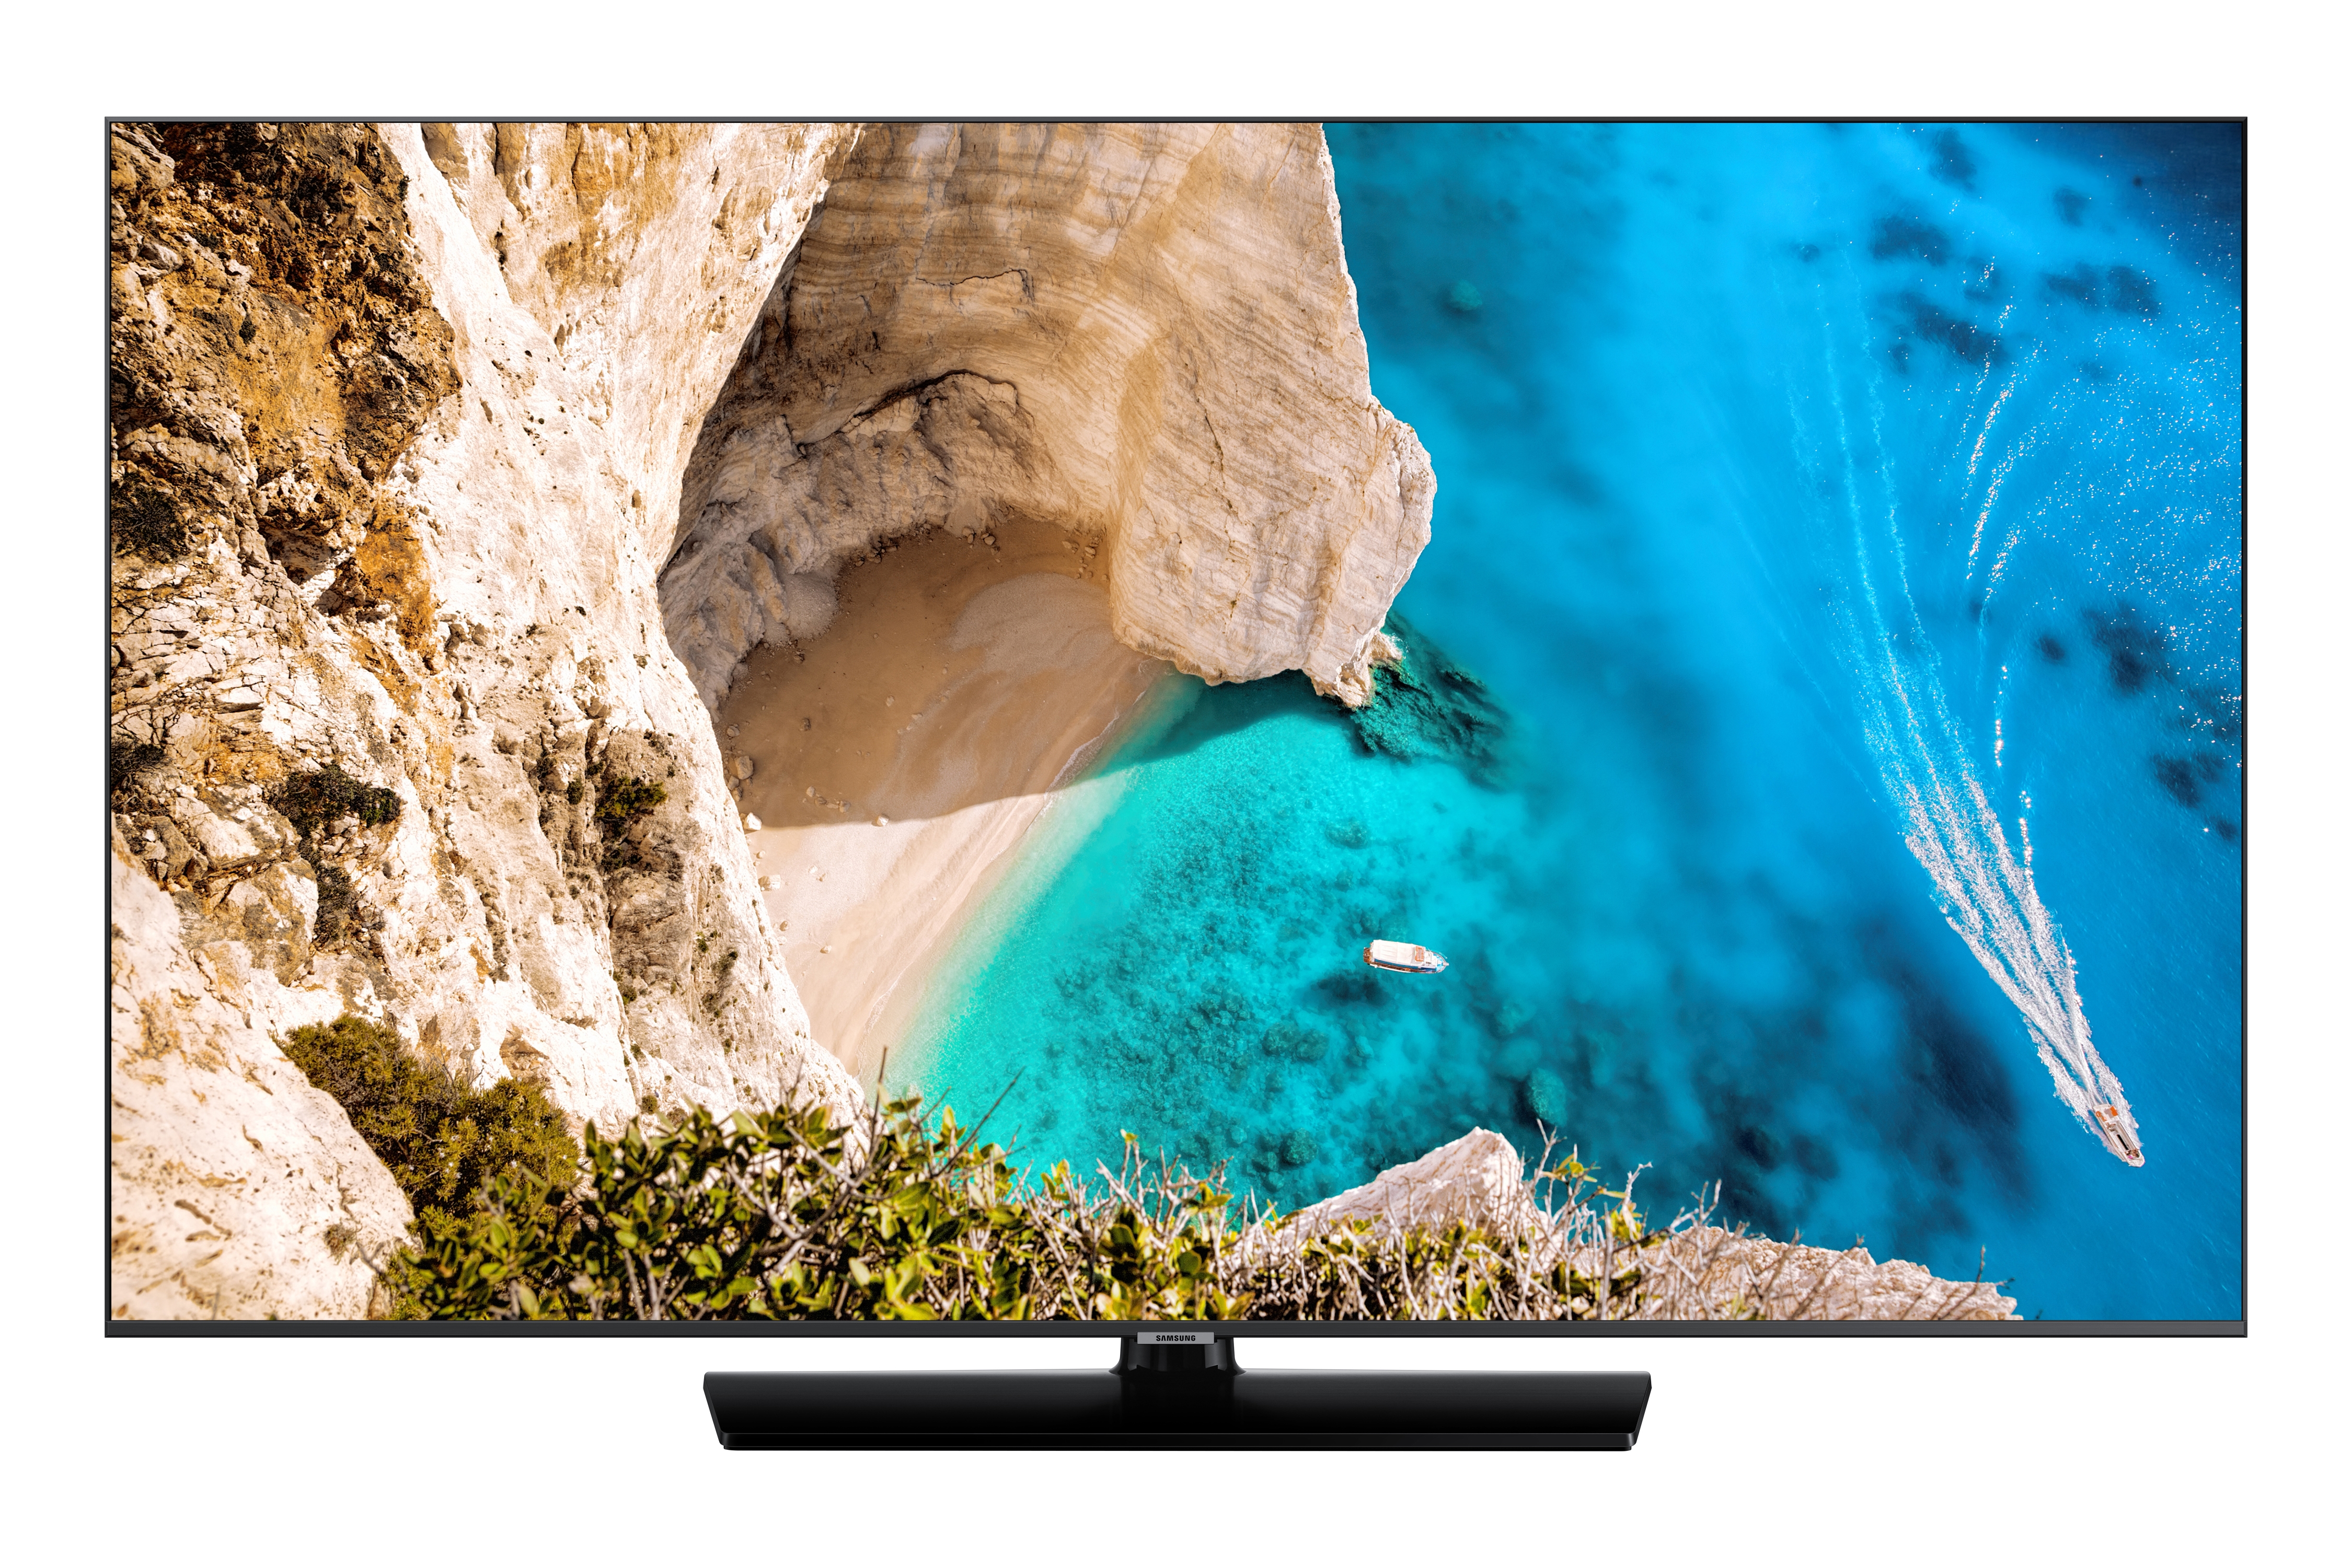 Try out The Stranger Attentive 43" NT670U Series 4K UHD Hospitality TV HG43NT670UFXZA | Samsung Business